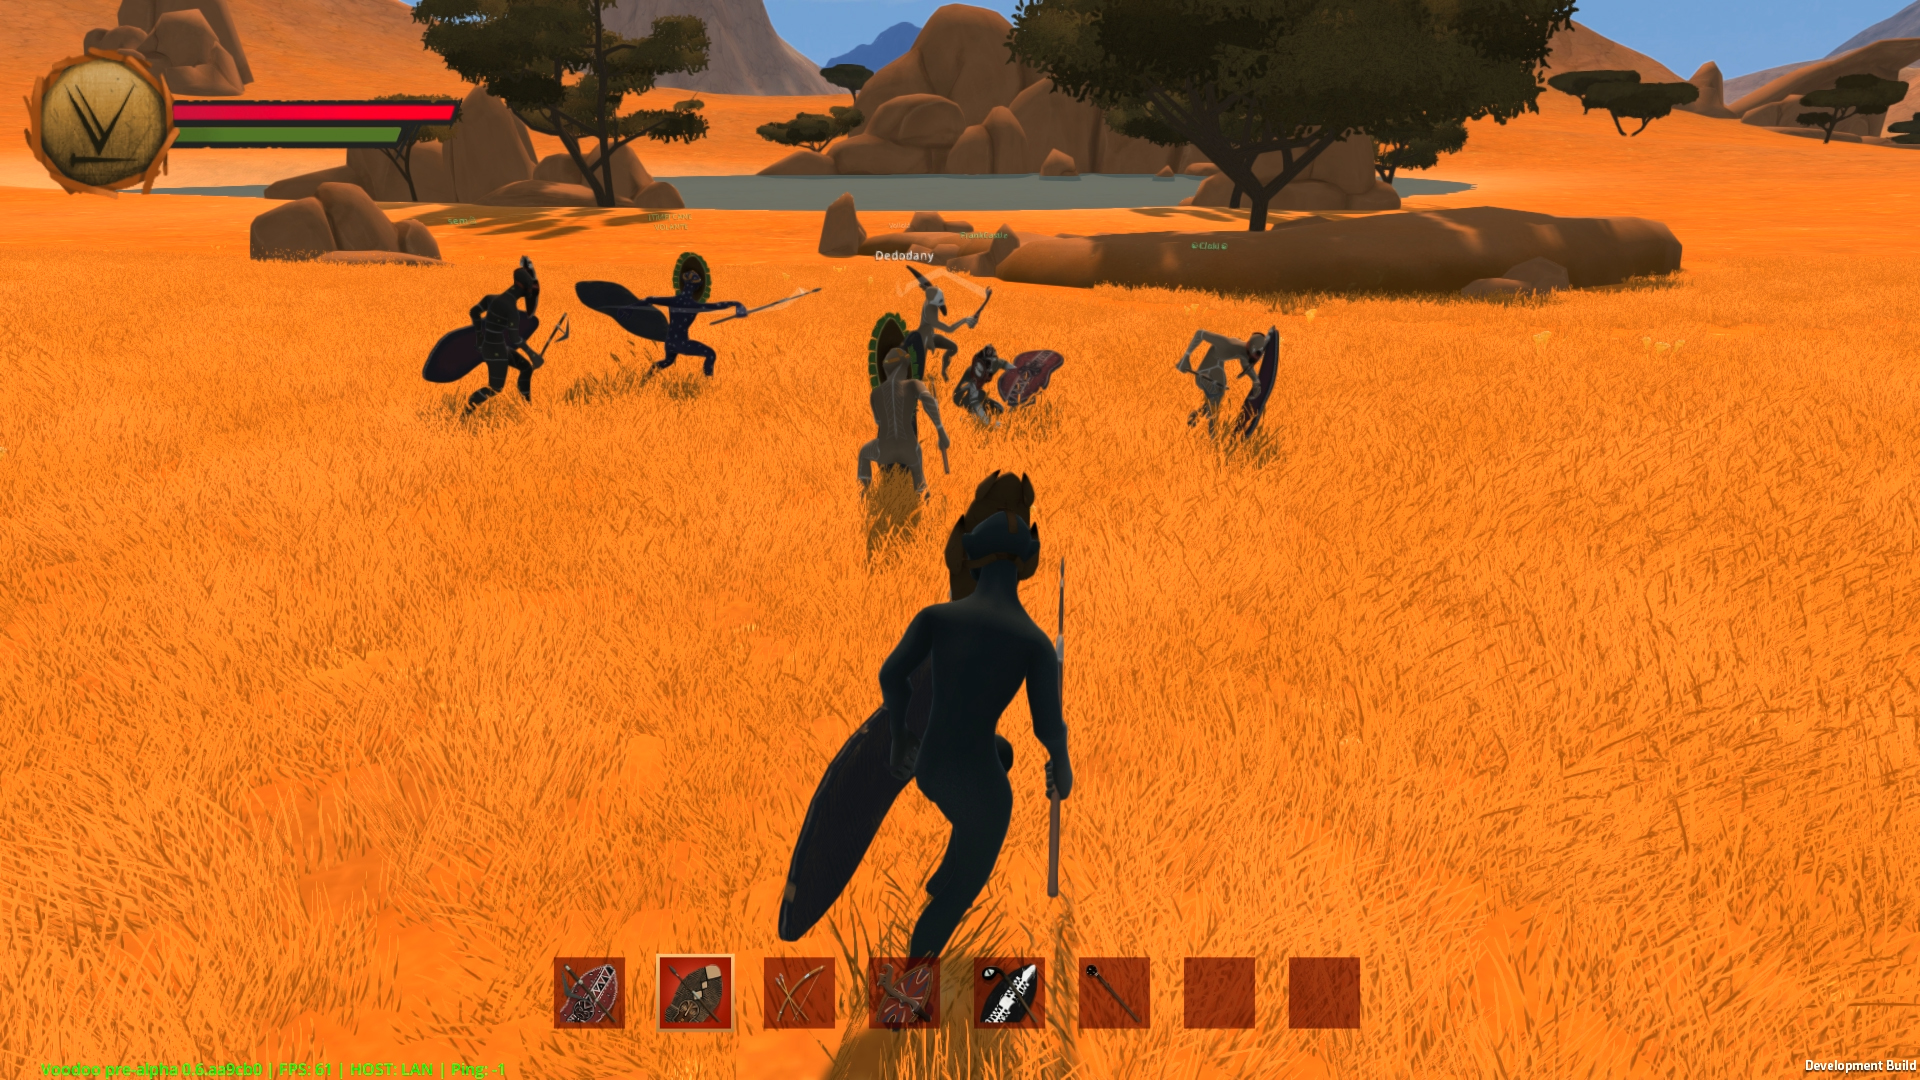 Voodoo: Open-World Survival In Primal Africa On Steam! by